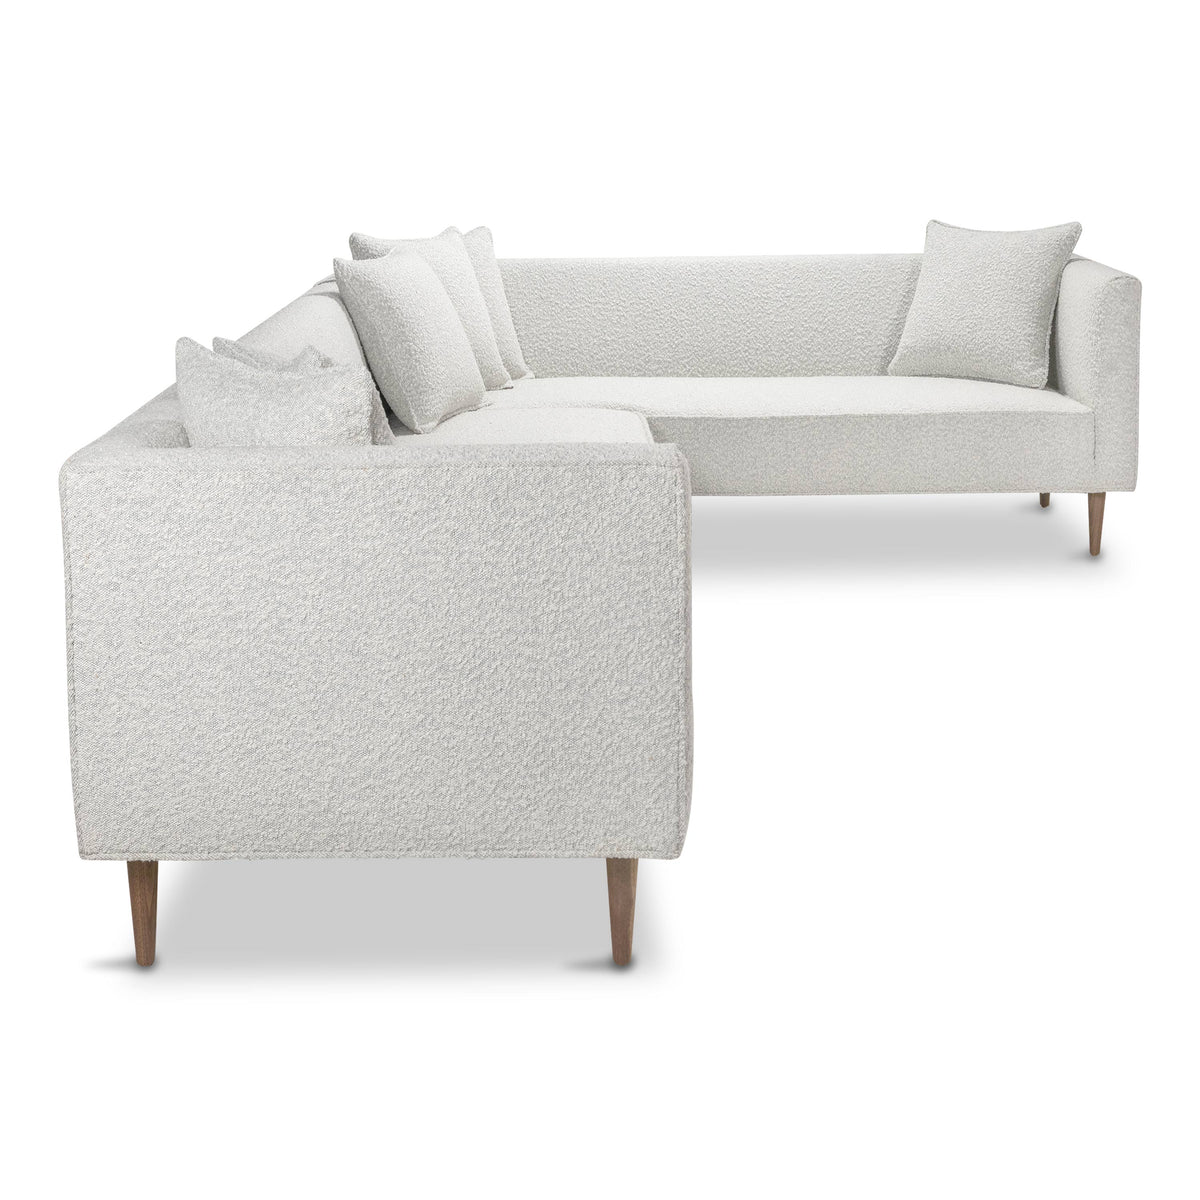 Saint Moritz Sectional in Boucle